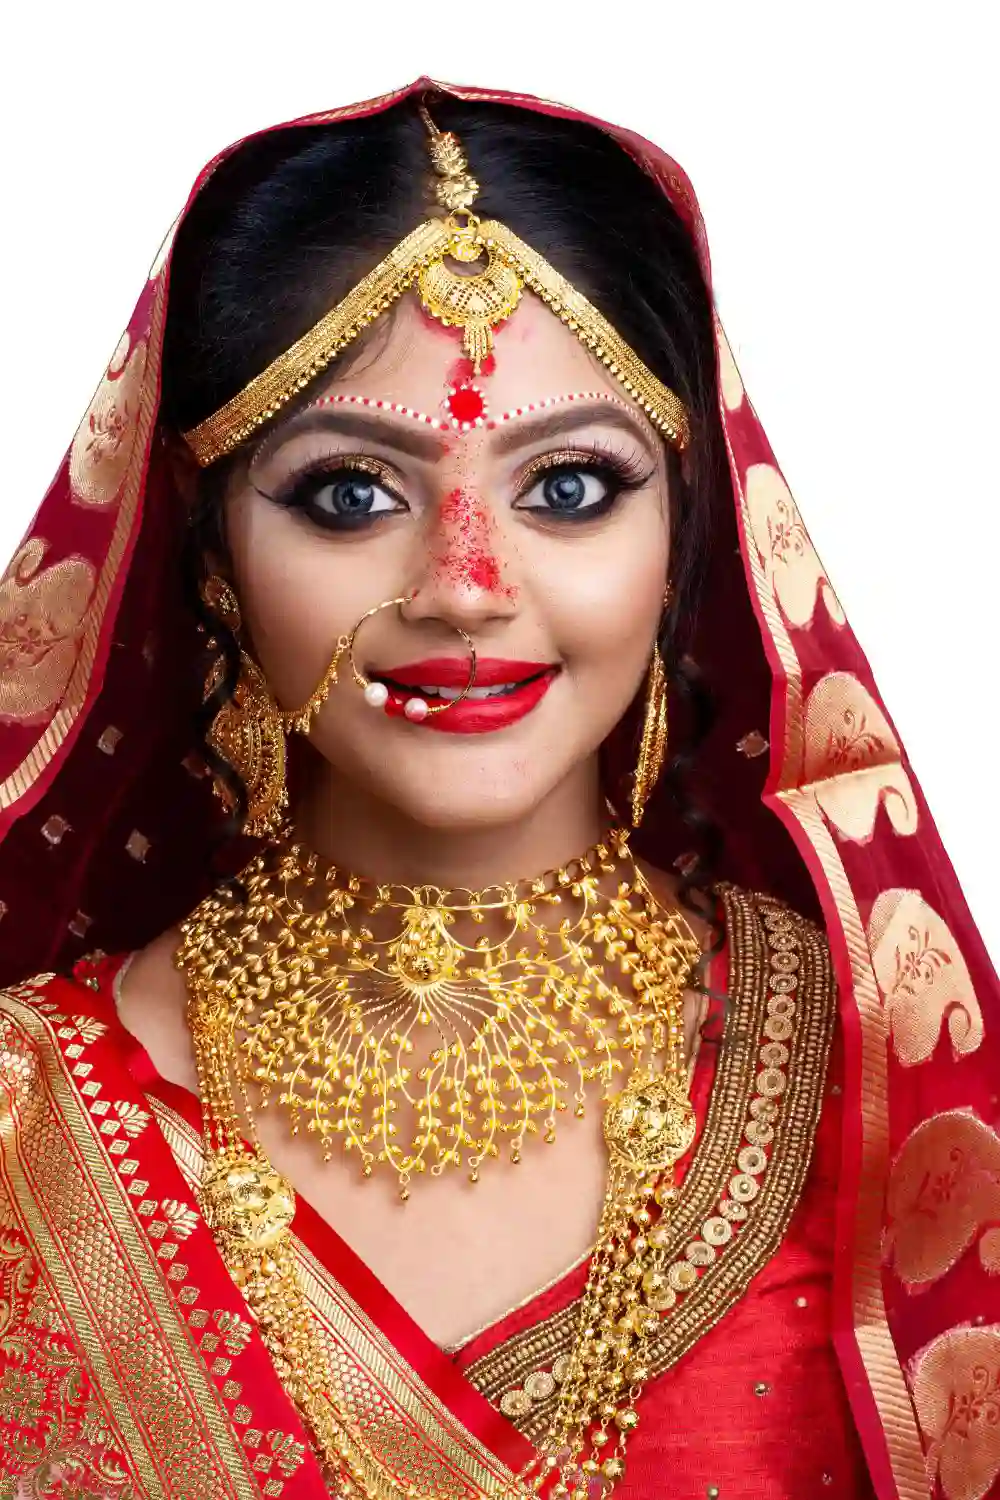 Indian or Bengali bride with sindoor in forehead wearing red sari and gold jewelry